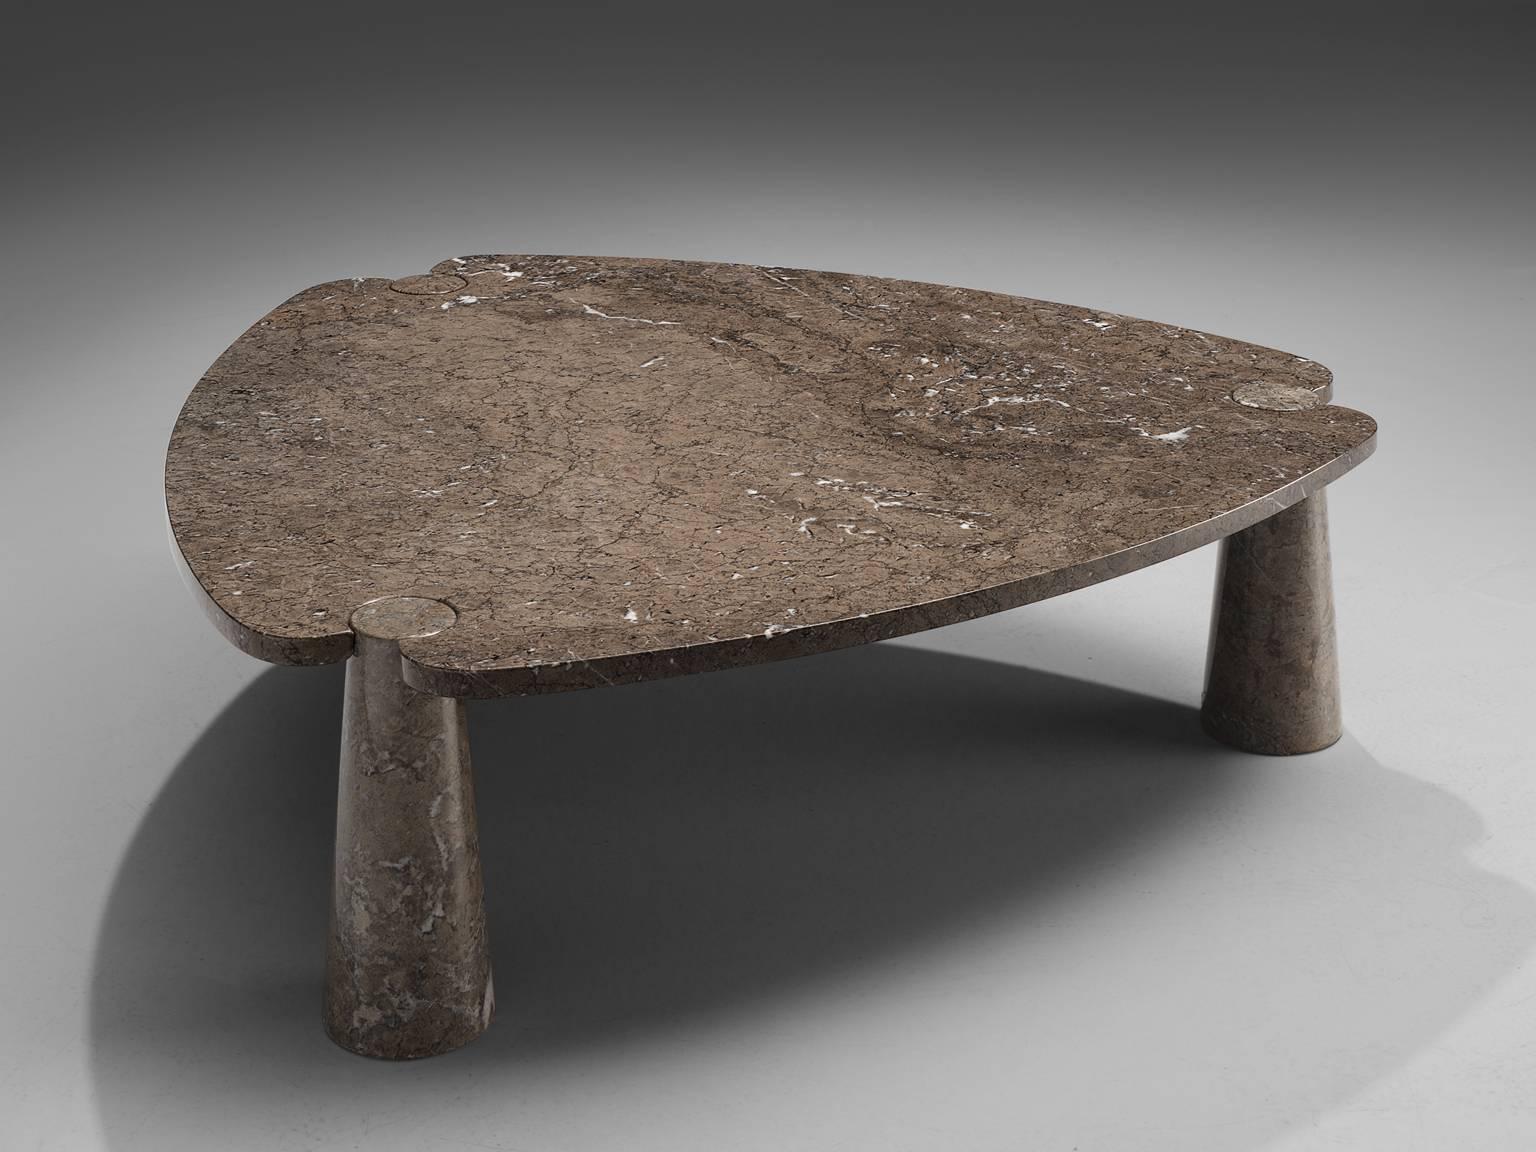 Angelo Mangiarotti, coffee table, marble, 1970s. 

This sculptural side table by Angelo Mangiarotti is a skillful example of postmodern design. The table is executed in grey marble featuring delicate white veins. The soft edged triangle table